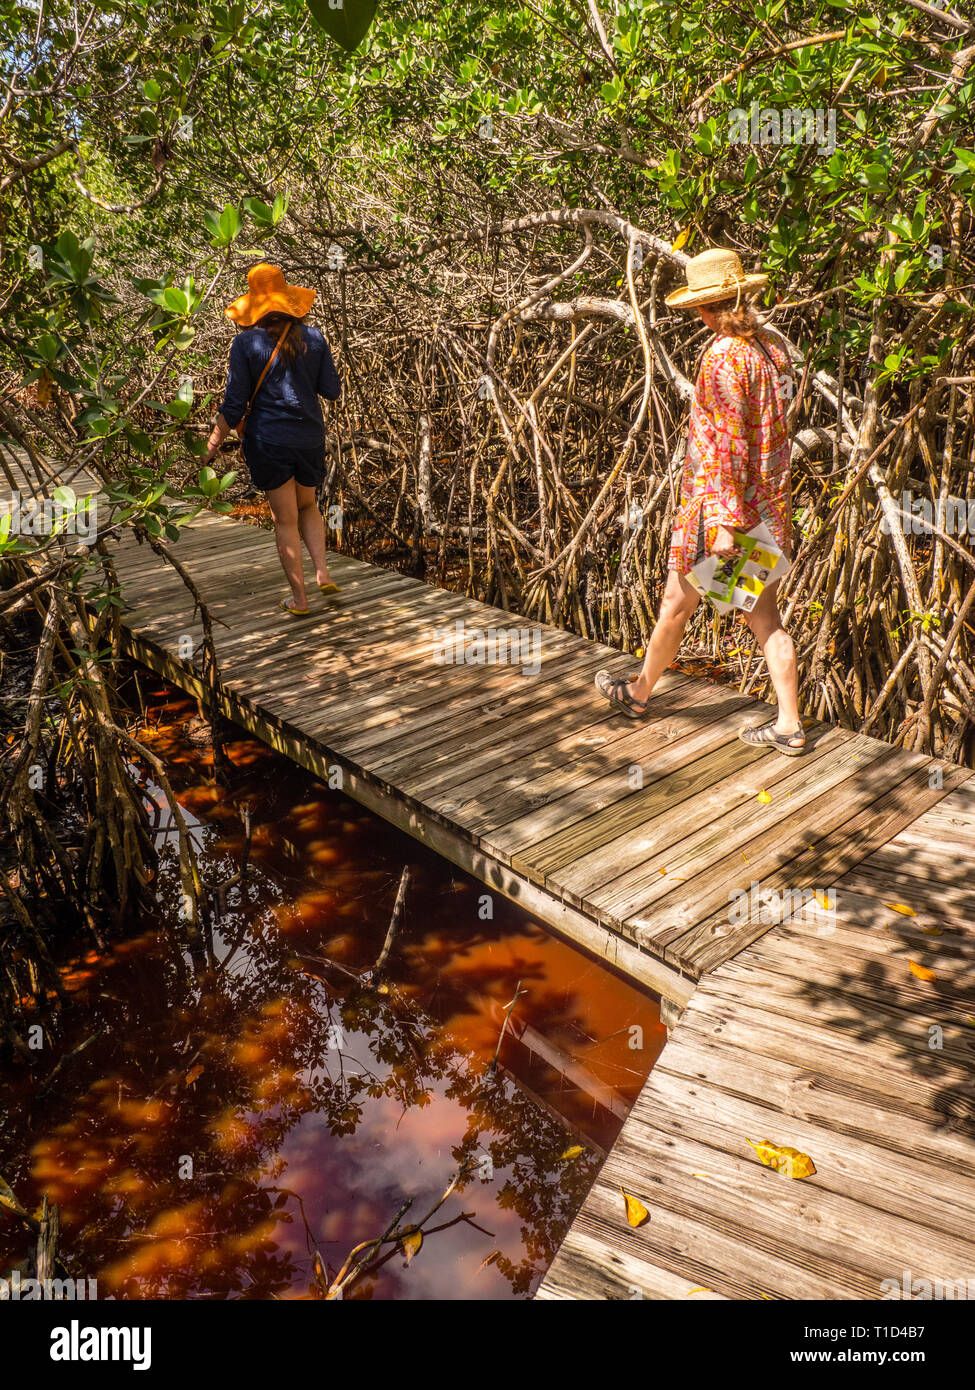 Tourists on Walkway threw, Mangrove Forest, Leon Levy Native Plant Preserve, Governors Harbour, Eleuthera, The Bahamas, The Caribbean. Stock Photo